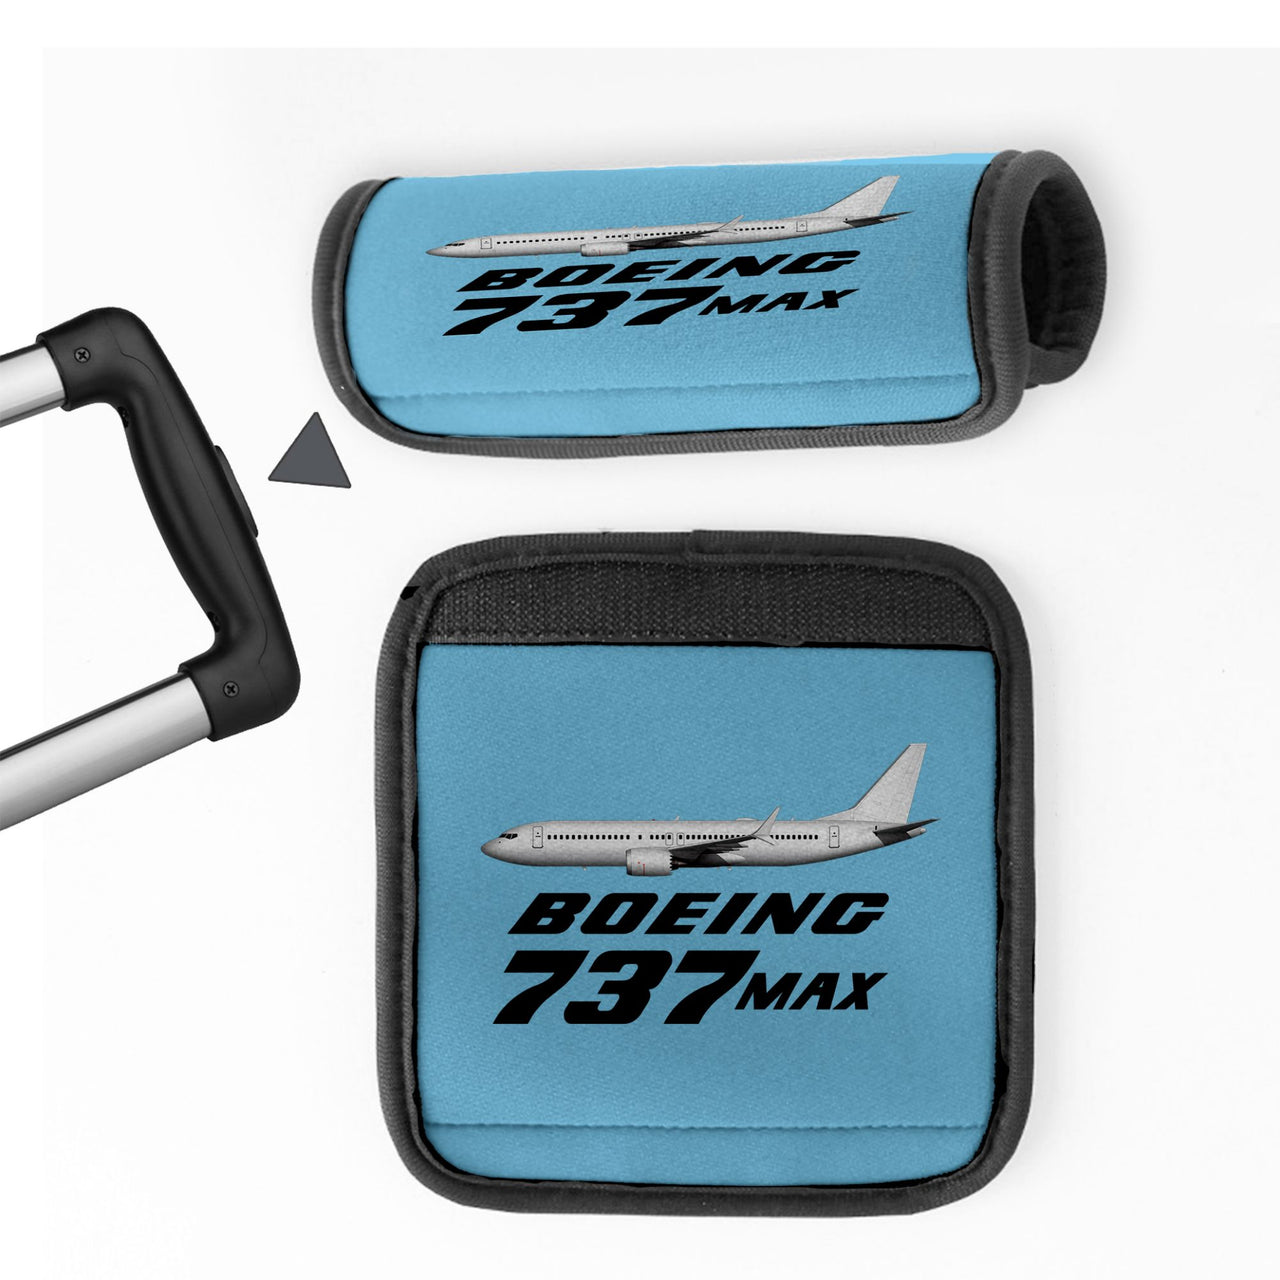 The Boeing 737Max Designed Neoprene Luggage Handle Covers